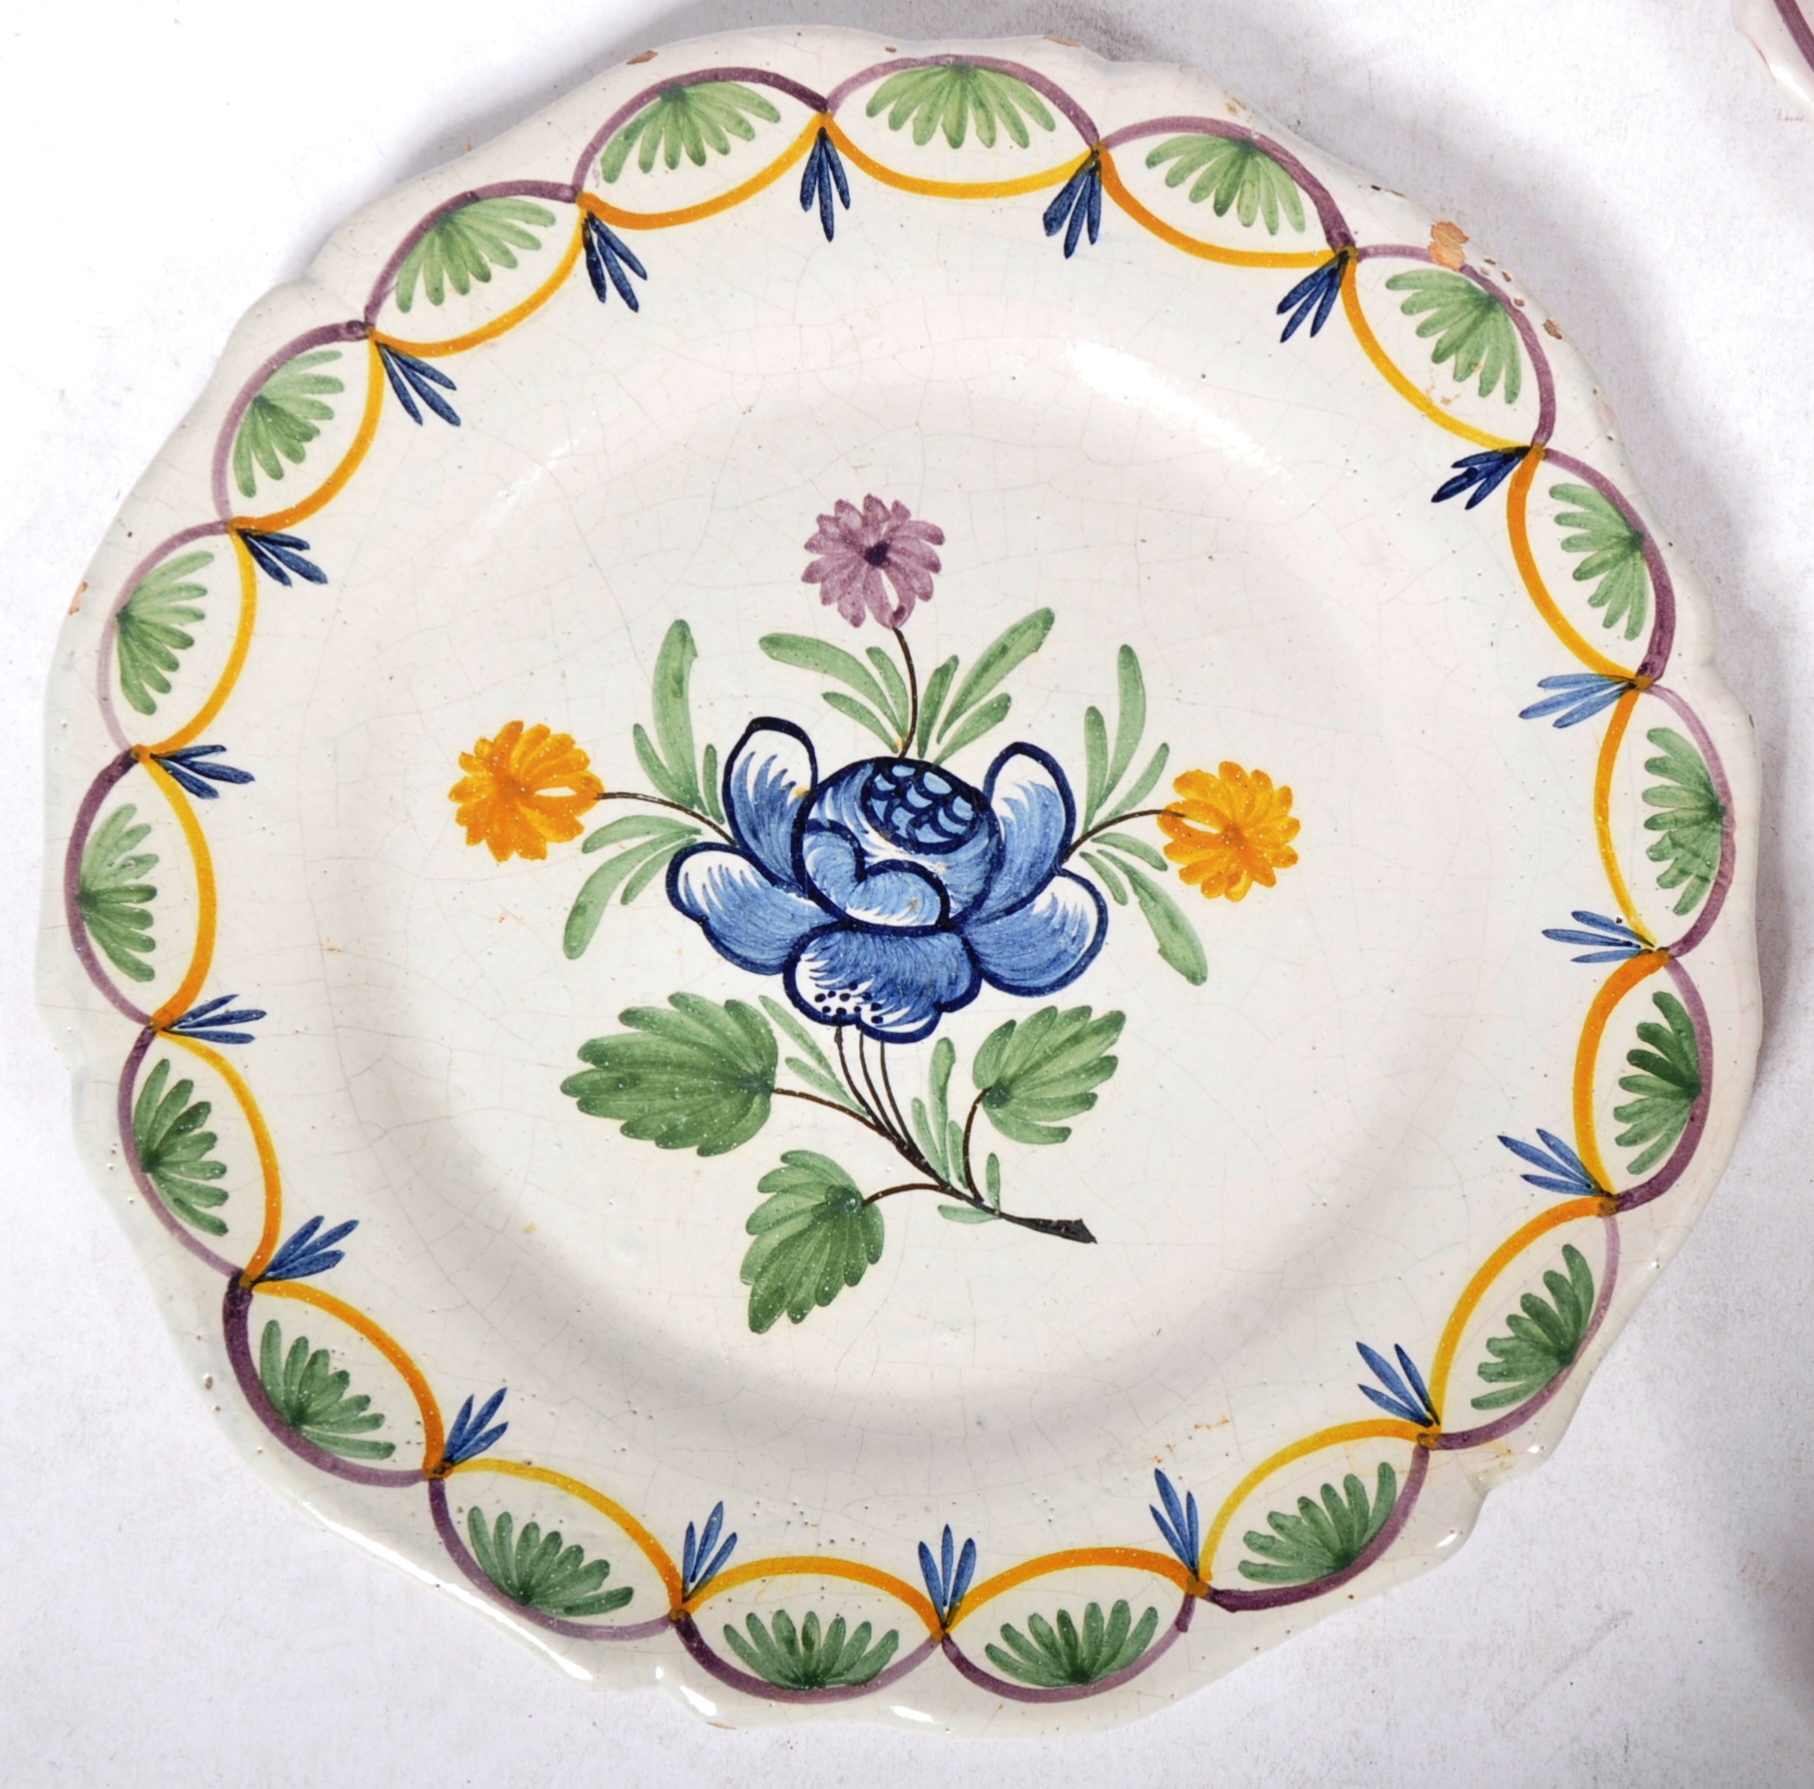 SELECTION OF 18TH / 19TH FRENCH FAIENCE TIN GLAZED PLATES - Image 5 of 10